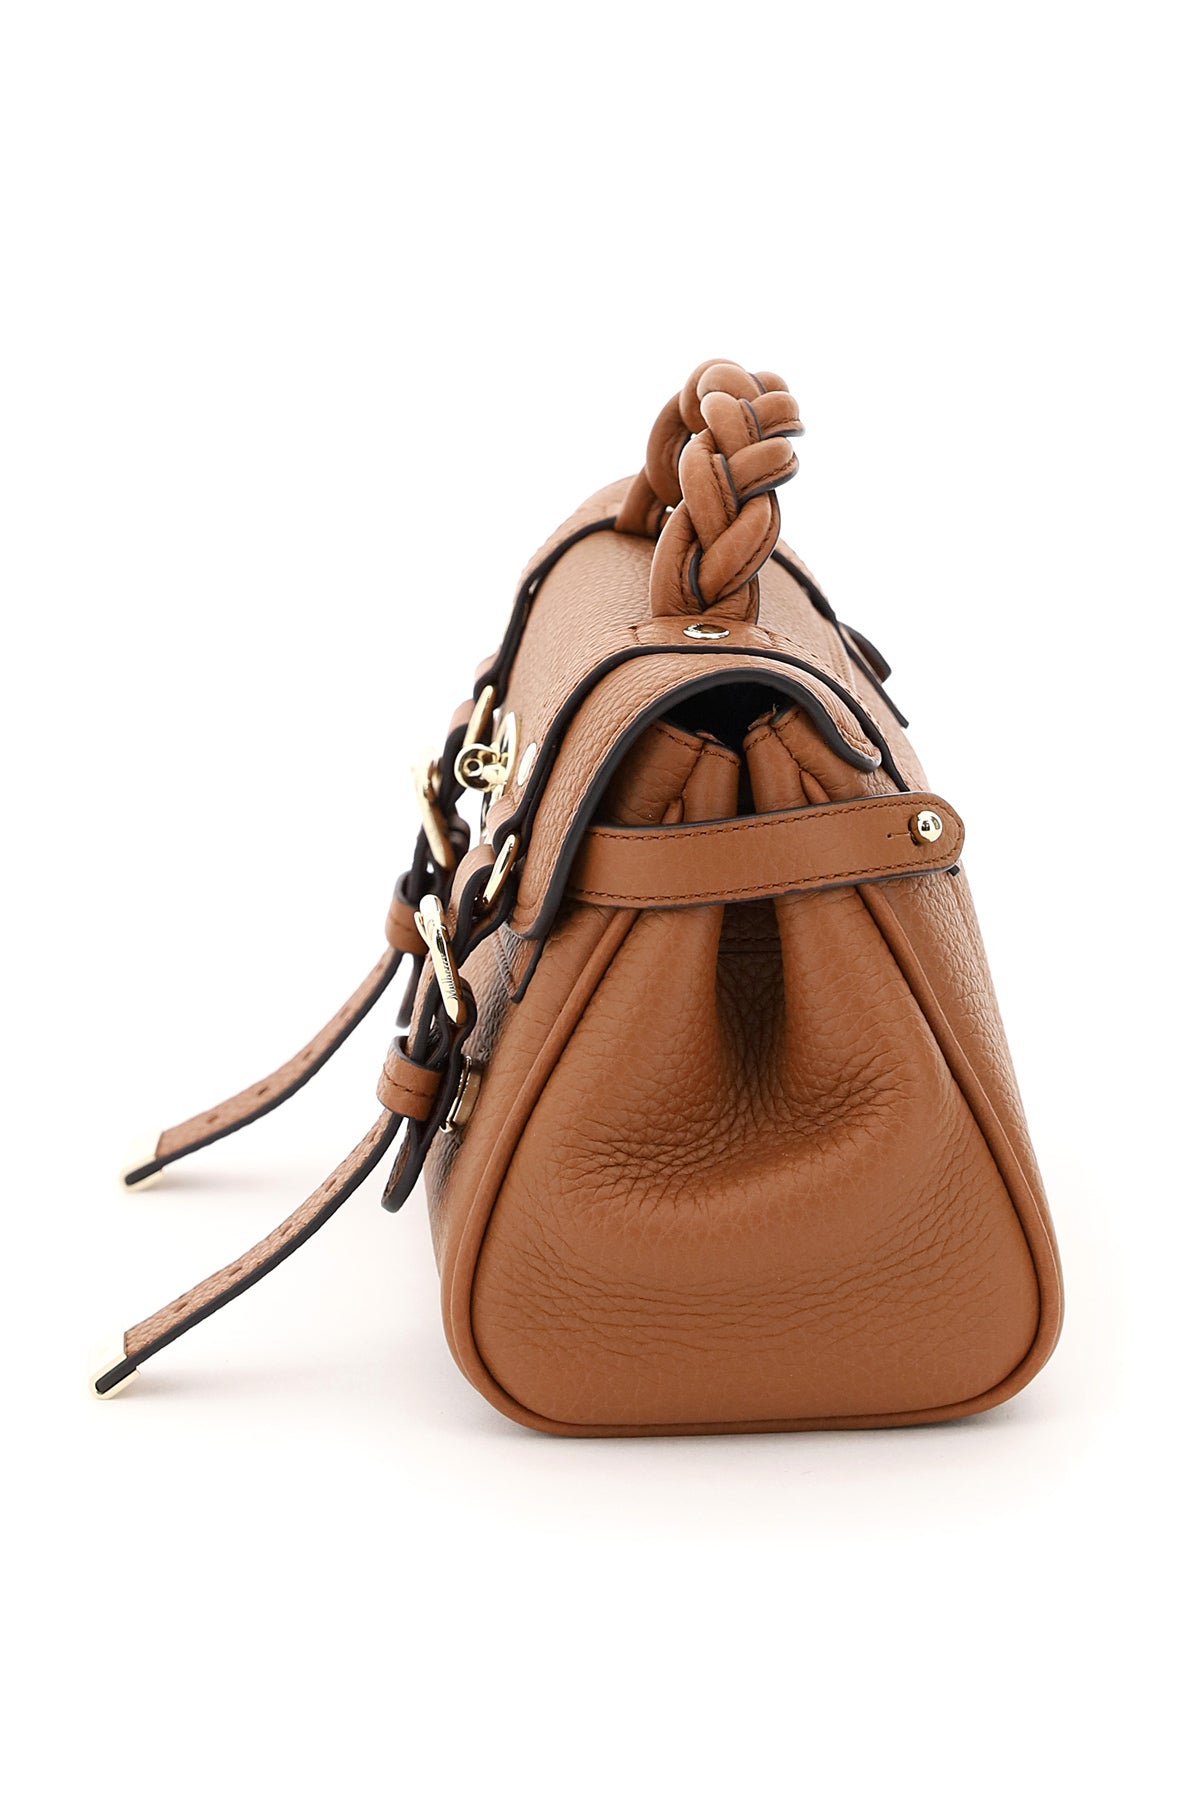 MULBERRY Mini Textured Leather Top-Handle Handbag with Braided Strap and Iconic Gold-Tone Closure